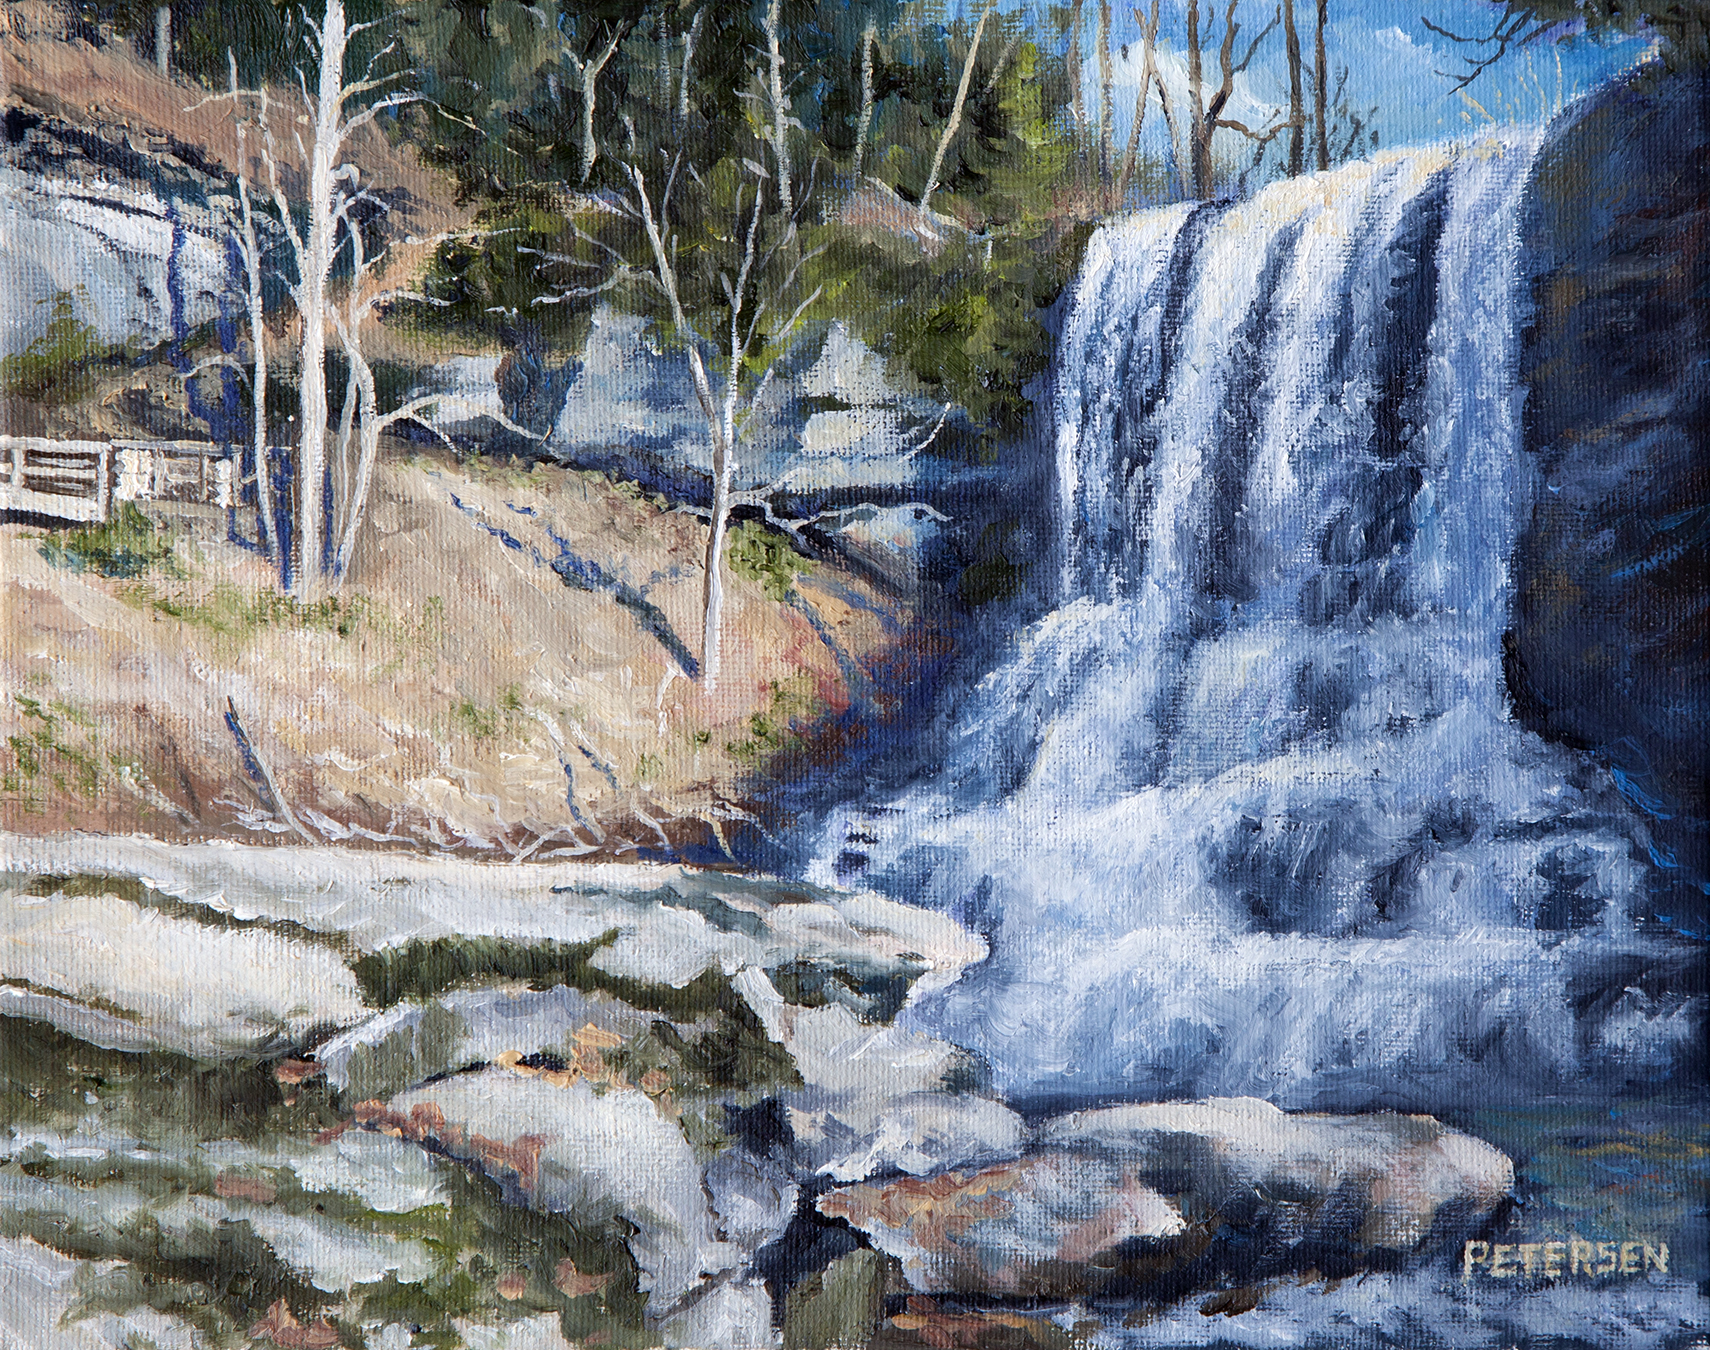 Cascades-Jefferson National Forest, Giles County, Va.   -SOLD